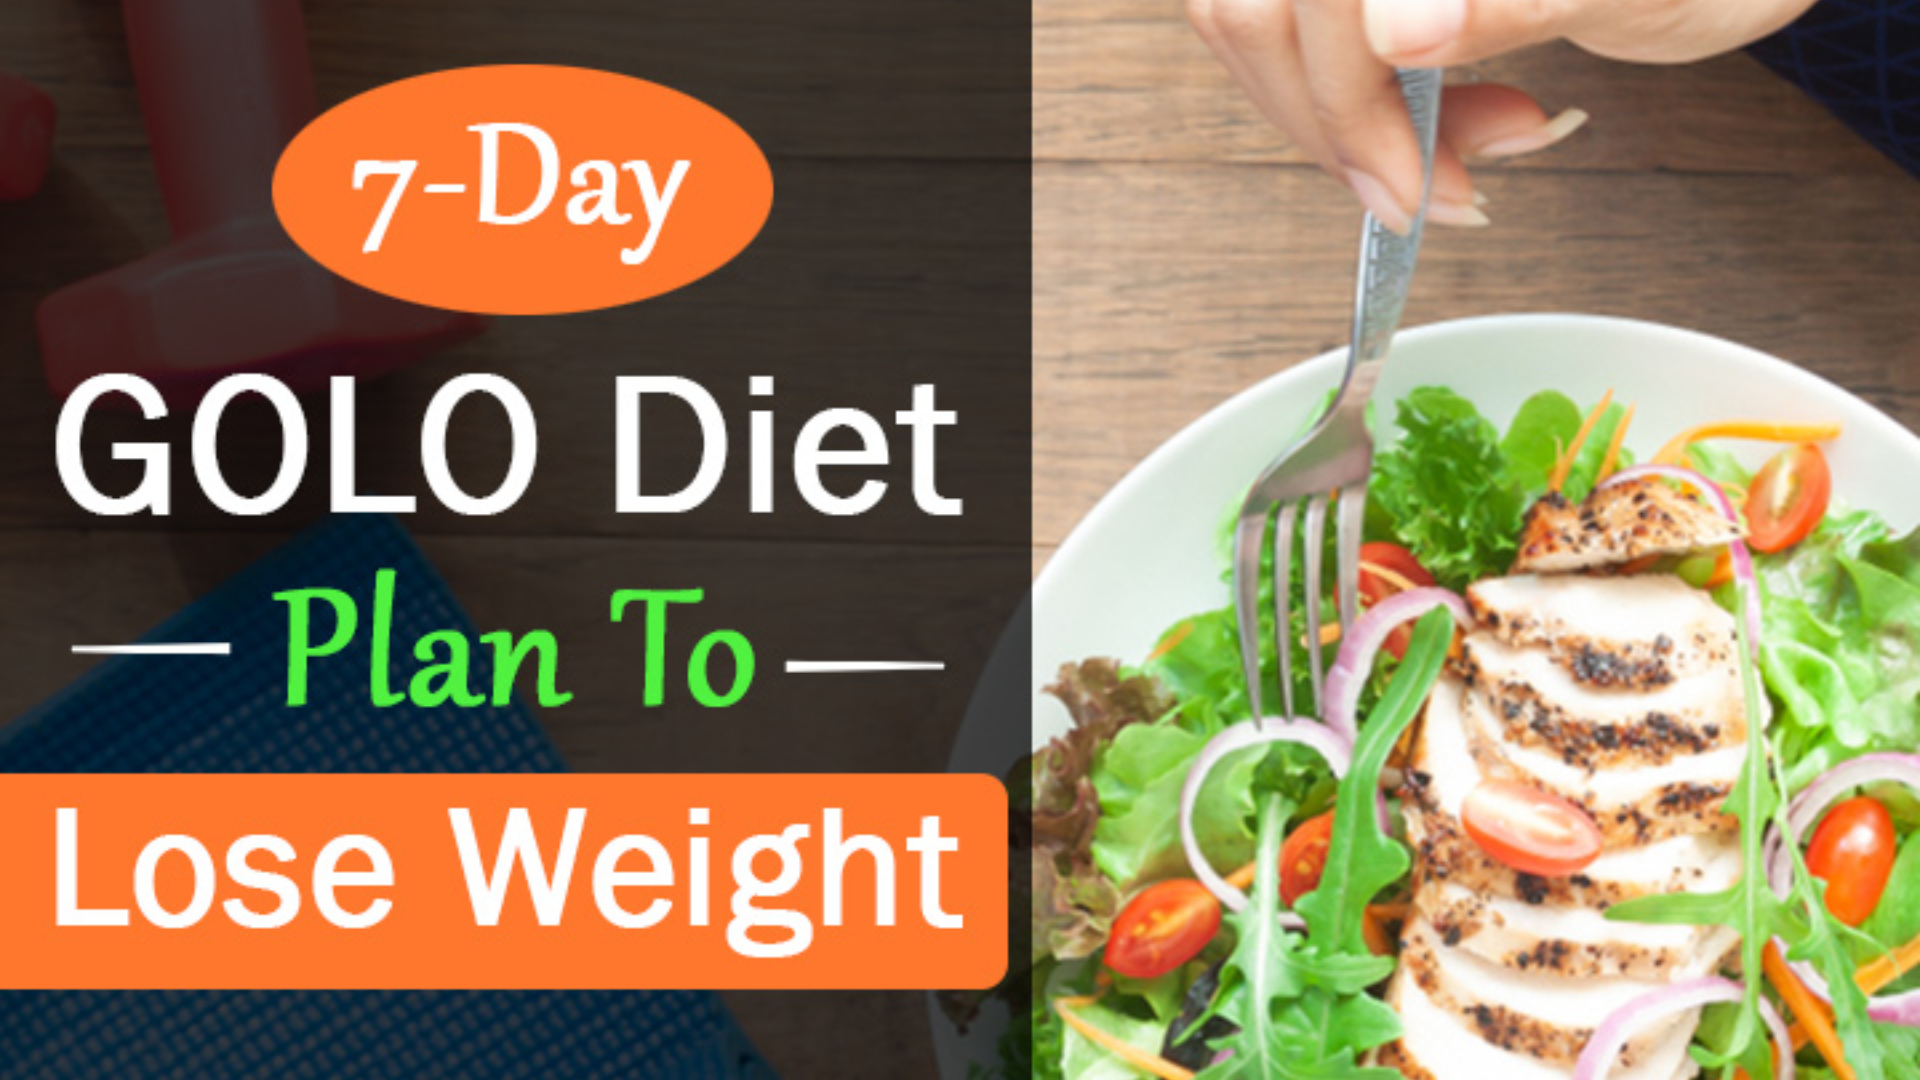 7-Day Golo Diet Plan to Lose Weight Effectively image